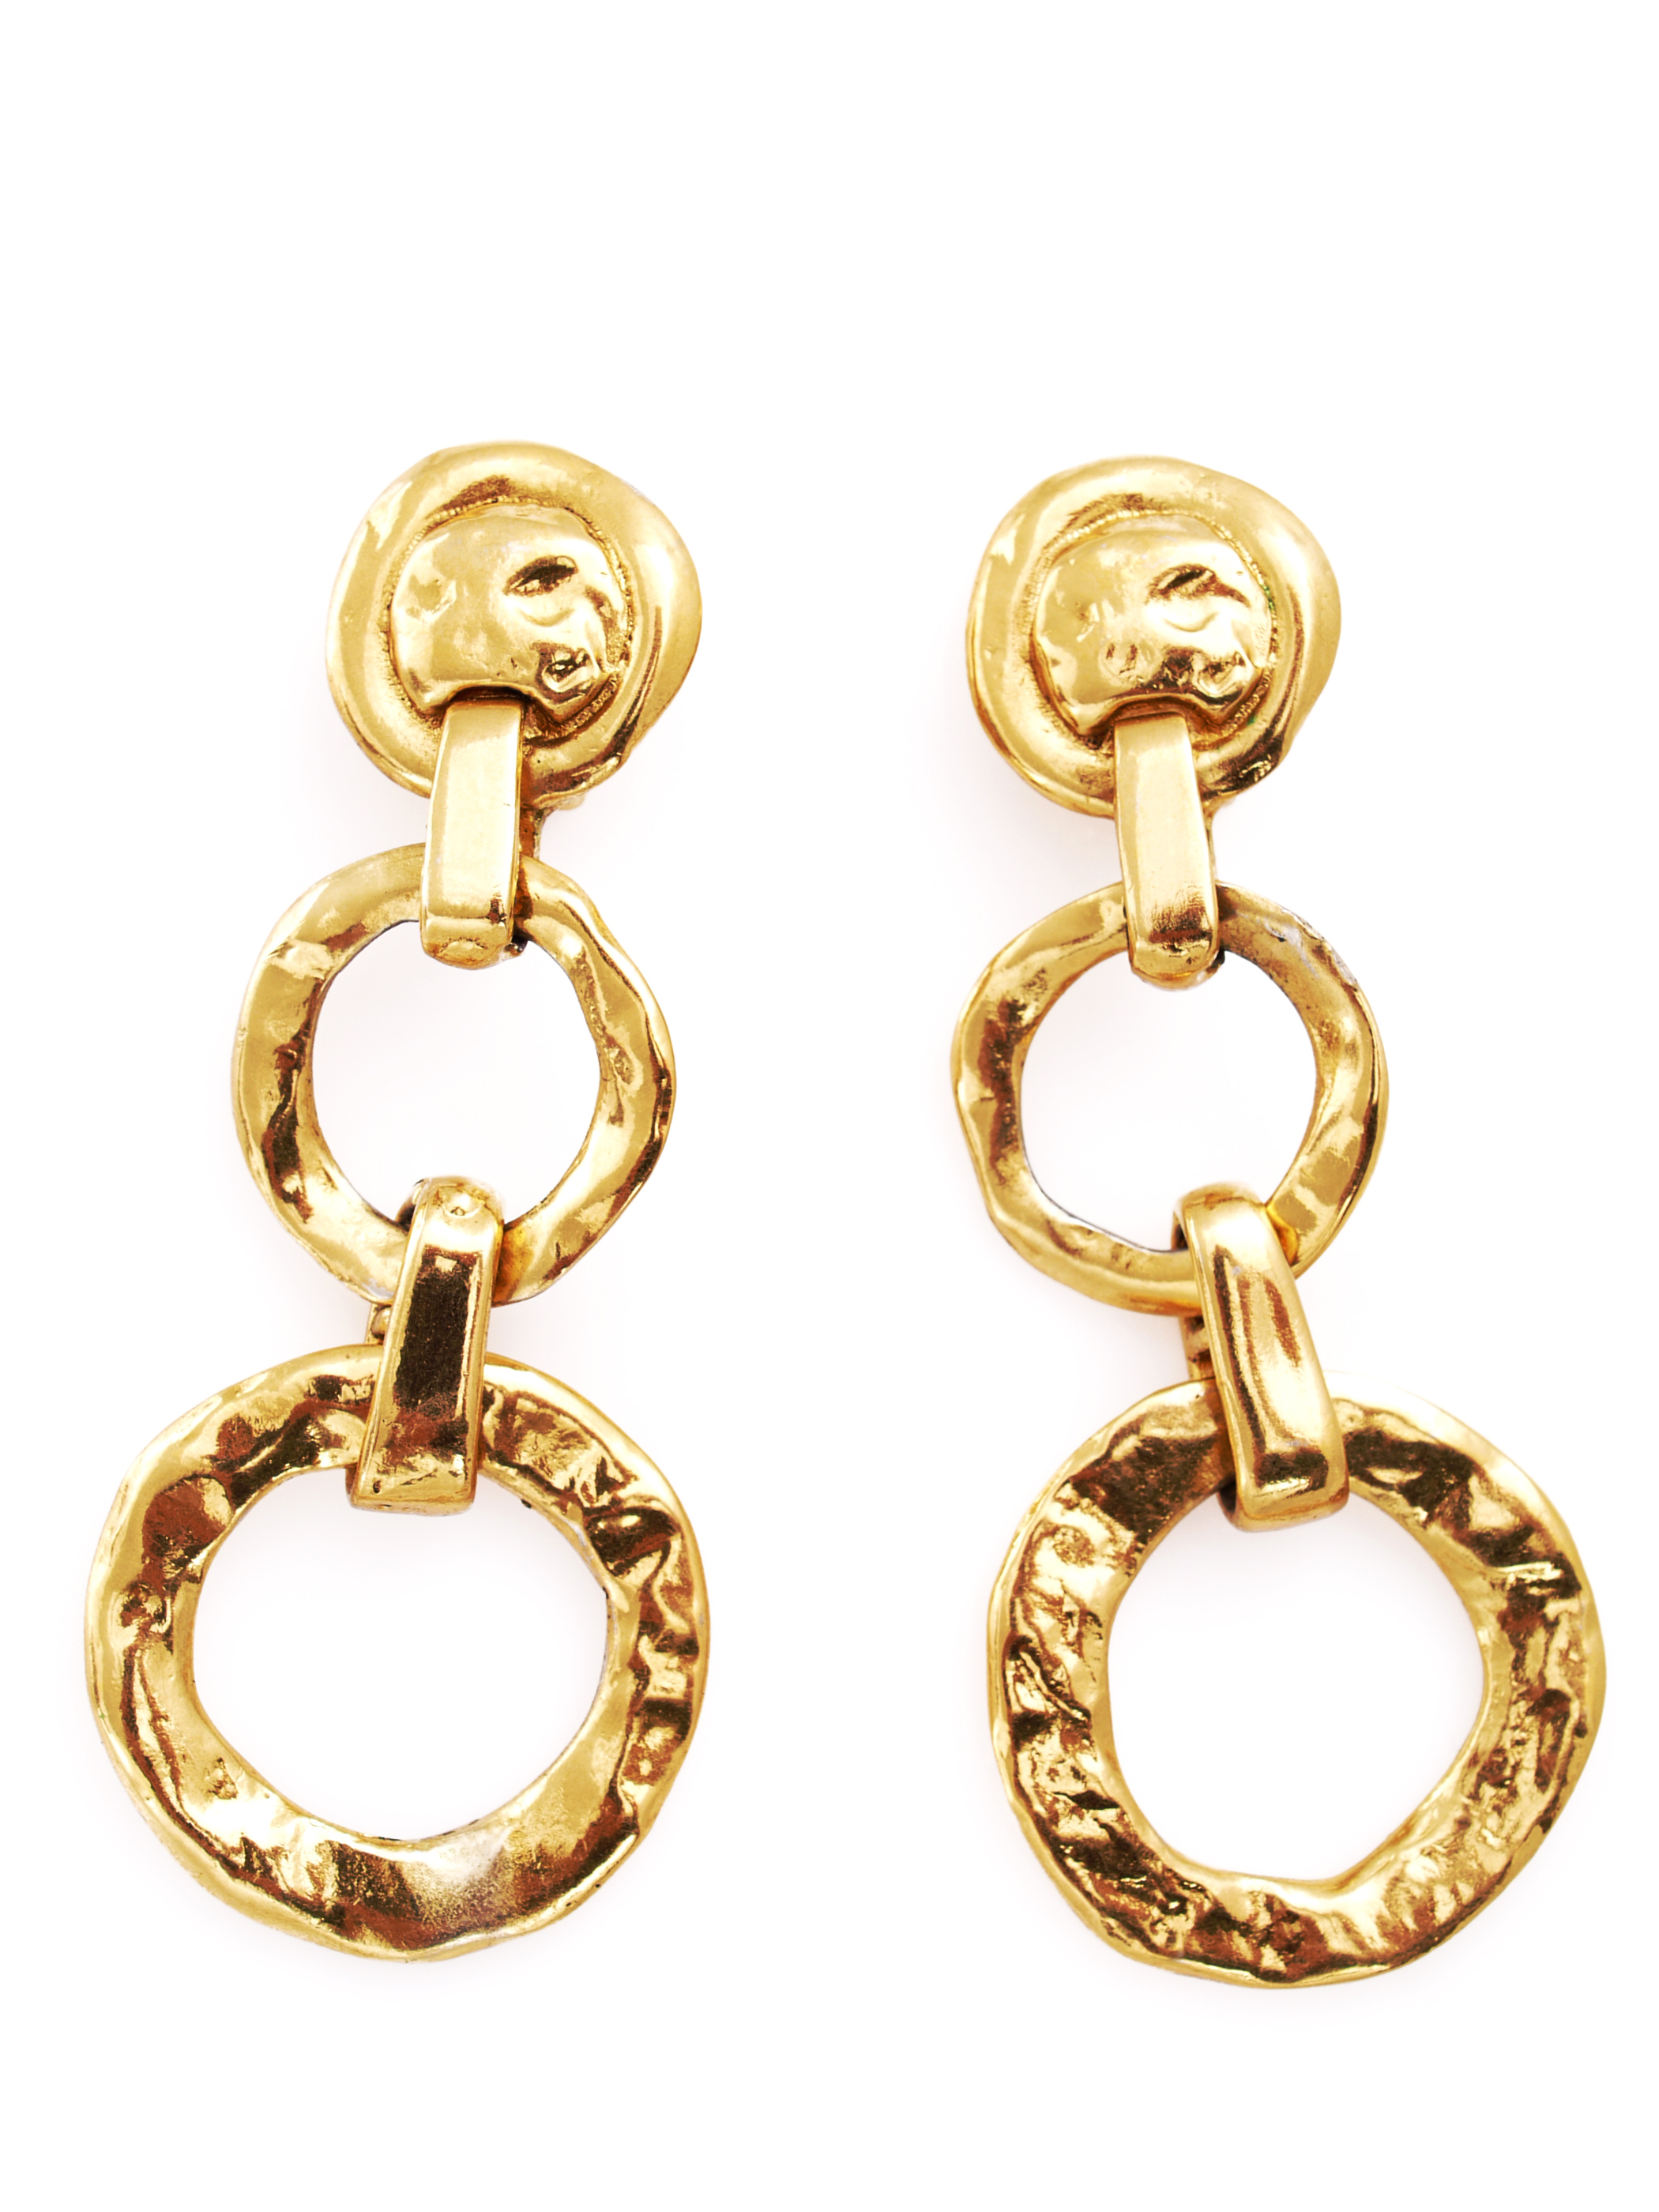 Gold drop earrings | Source: Getty Images